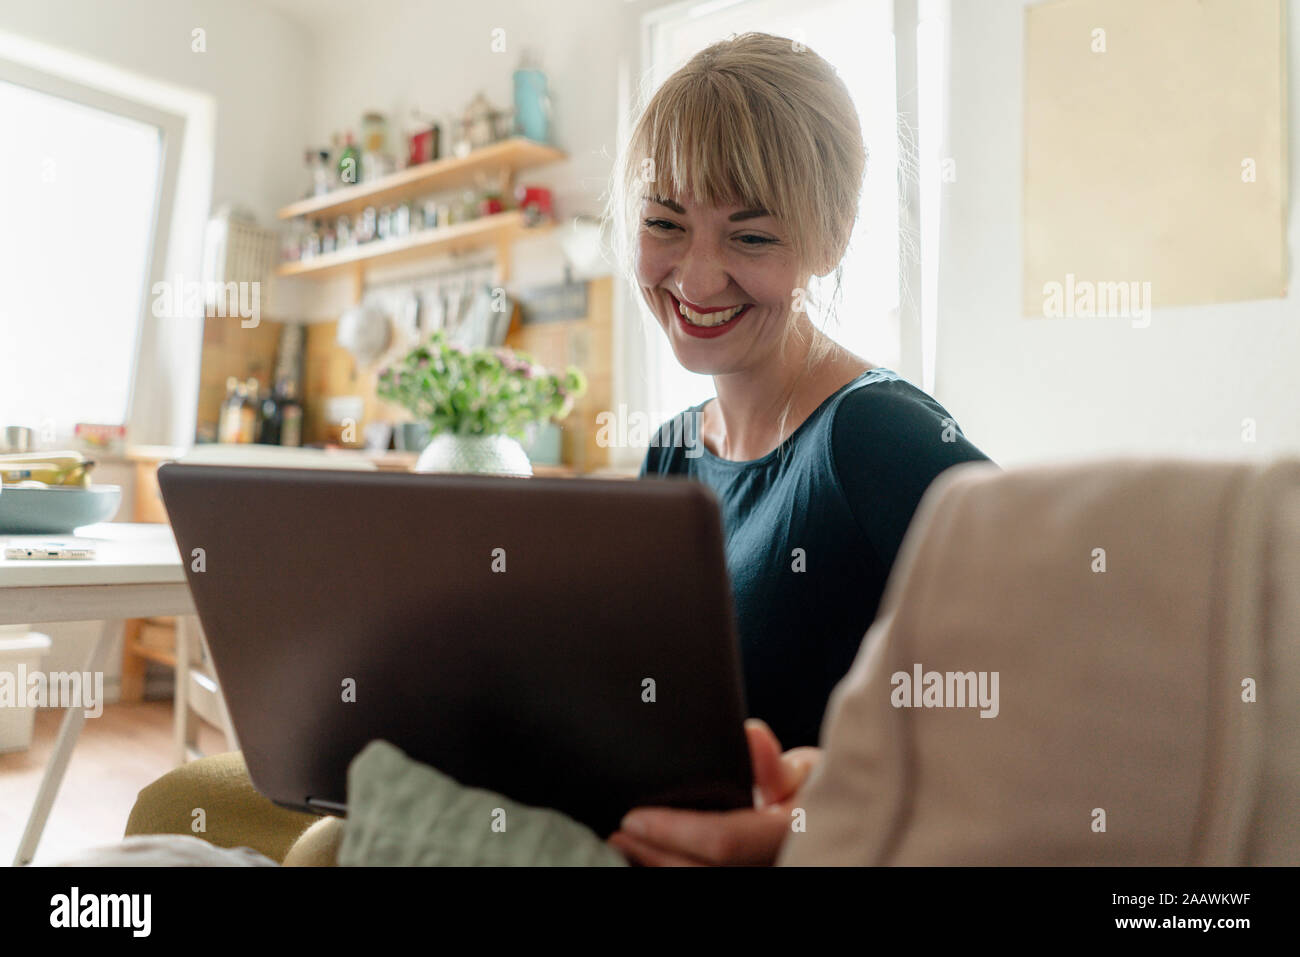 Portrait of happy woman sitting in the kitchen using laptop Banque D'Images